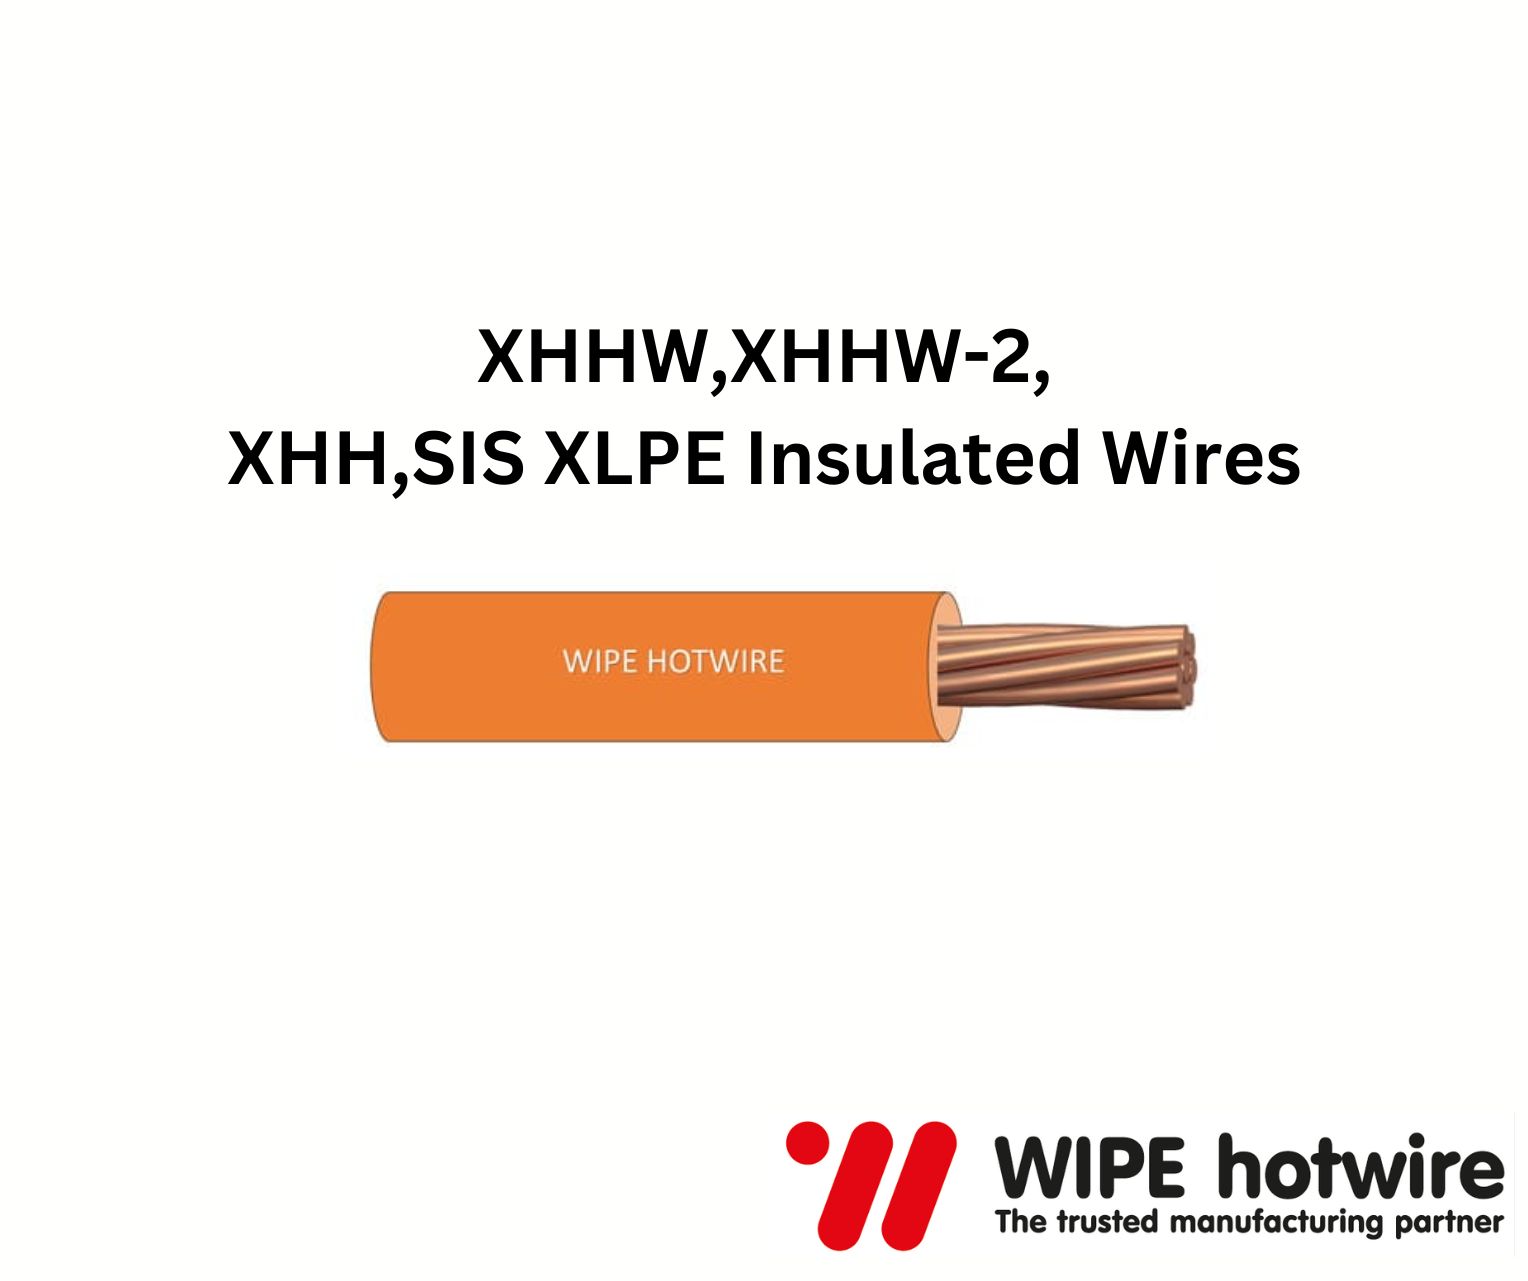 SIS XLPE Insulated Wires